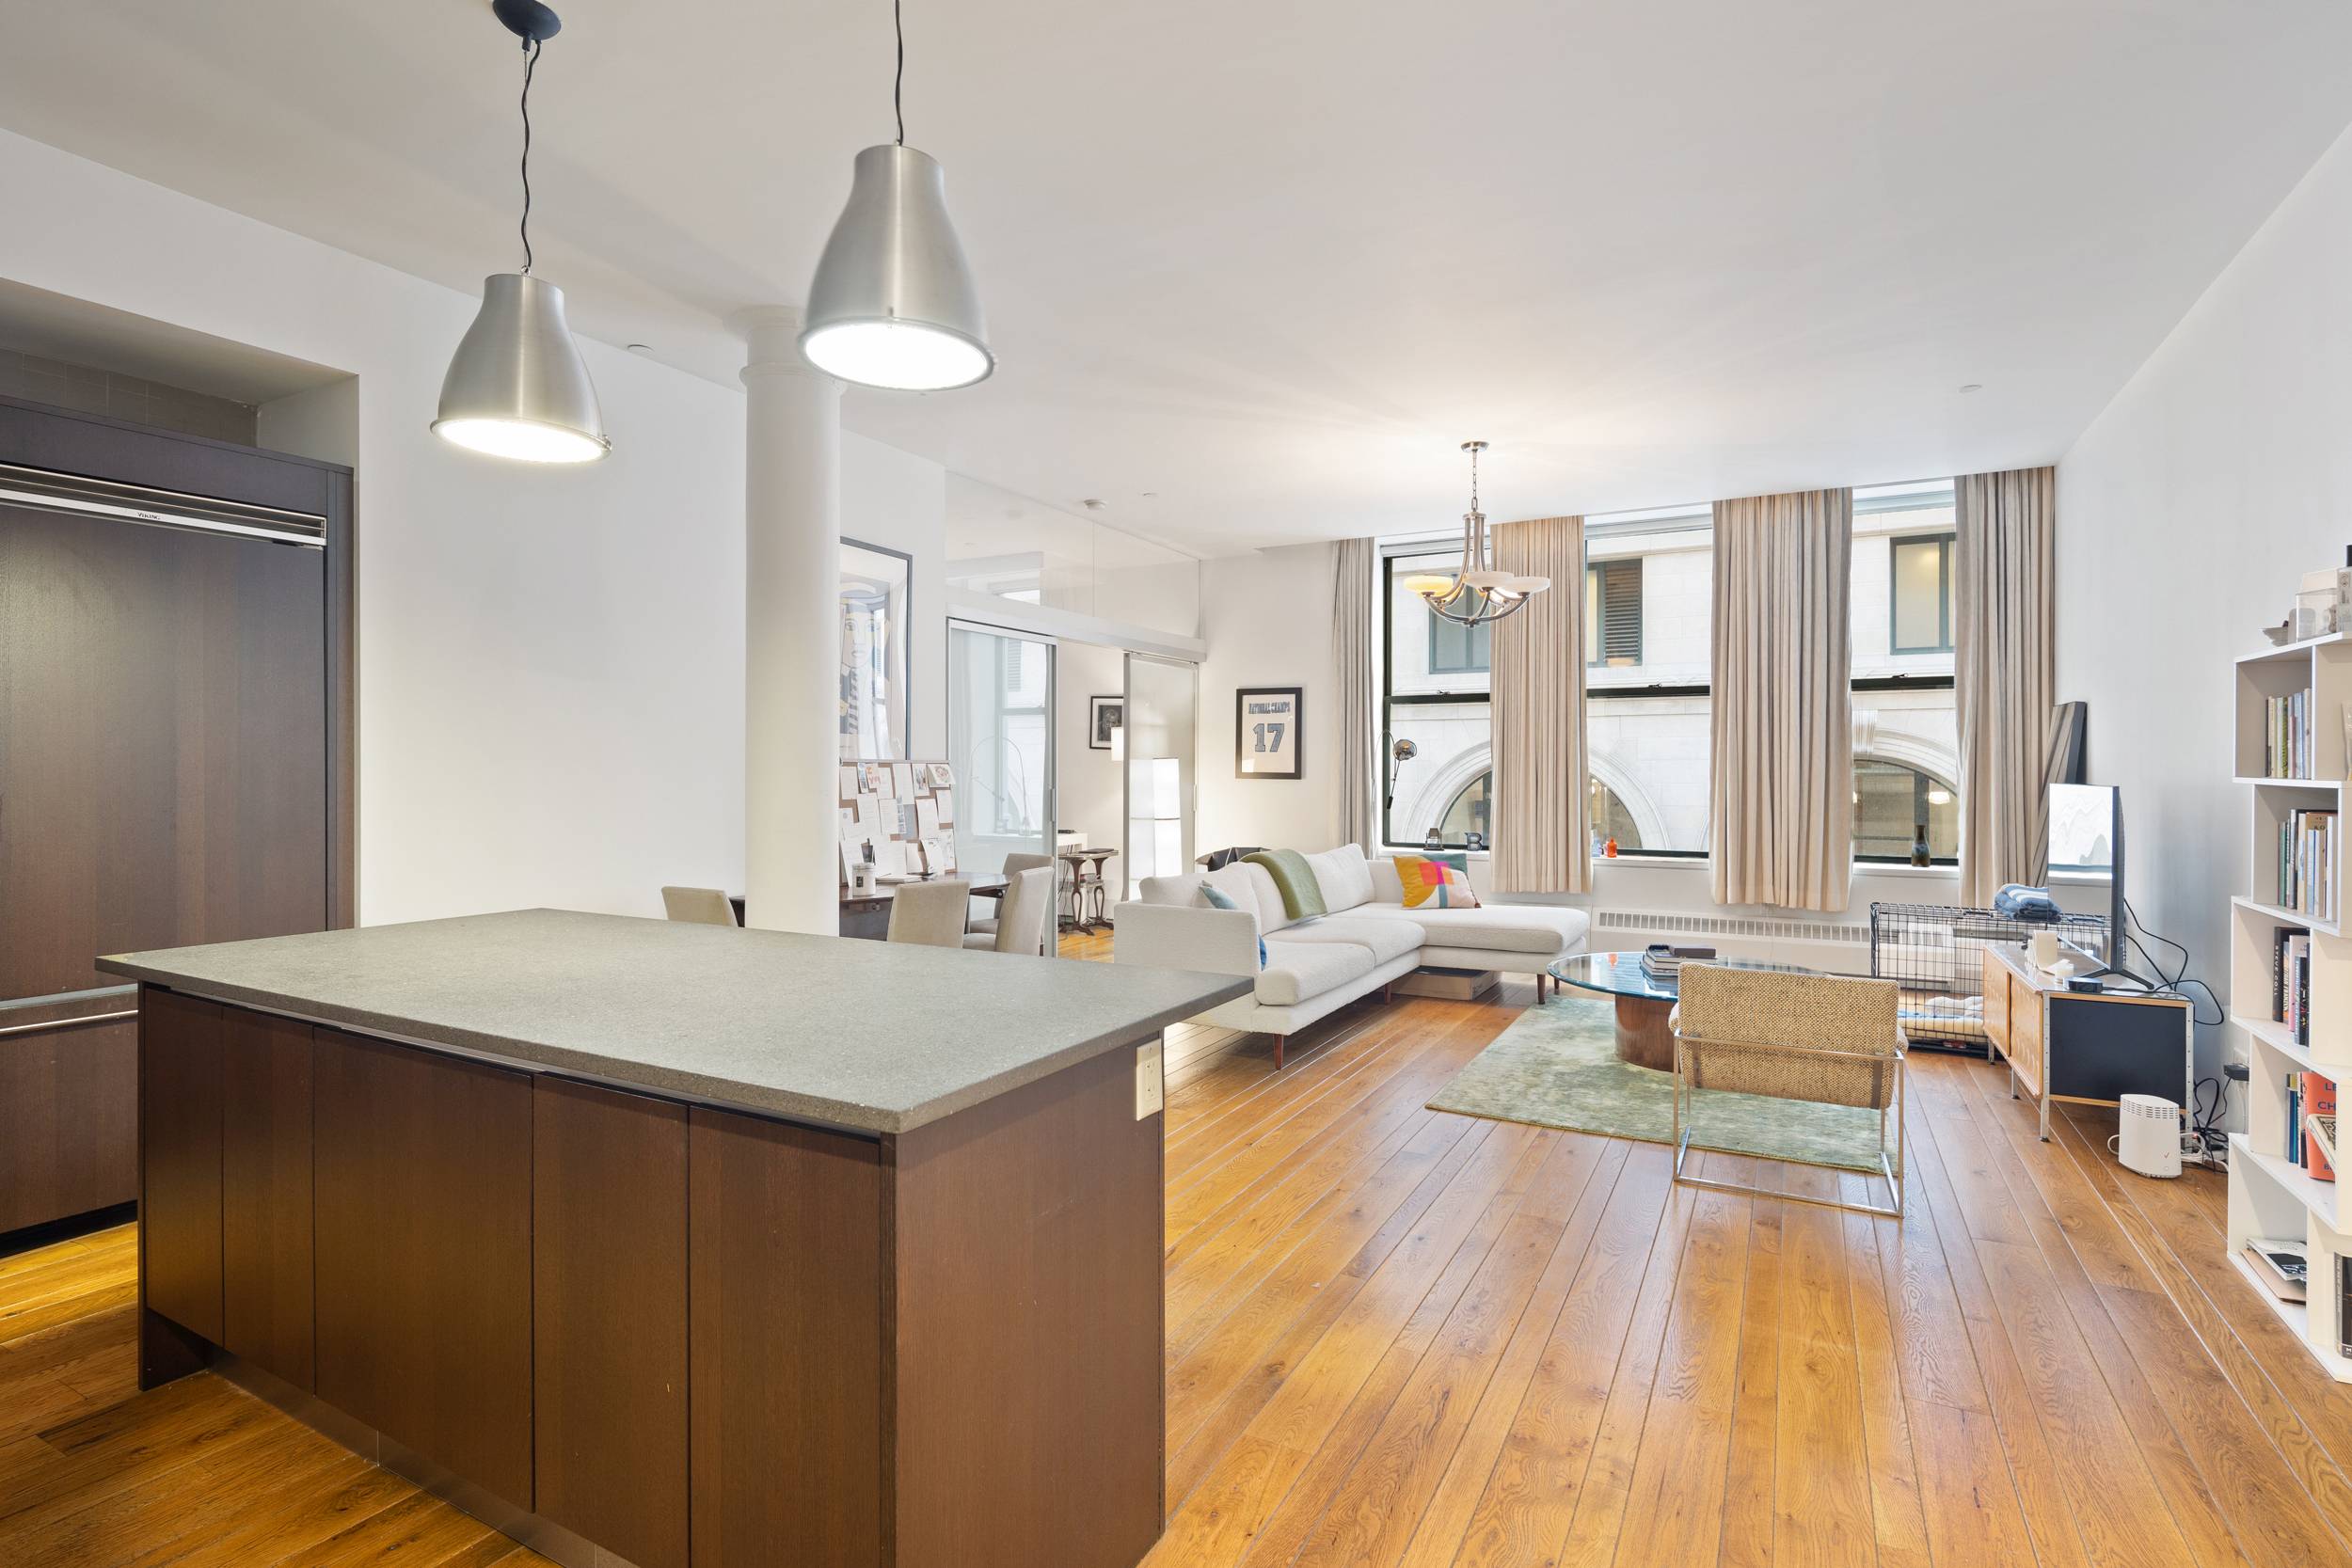 Perfect for entertaining and literally steps away from the heart of Greenwich village amp ; NOHO, this ultra modern and classic one bedroom apartment has to be experienced for one ...